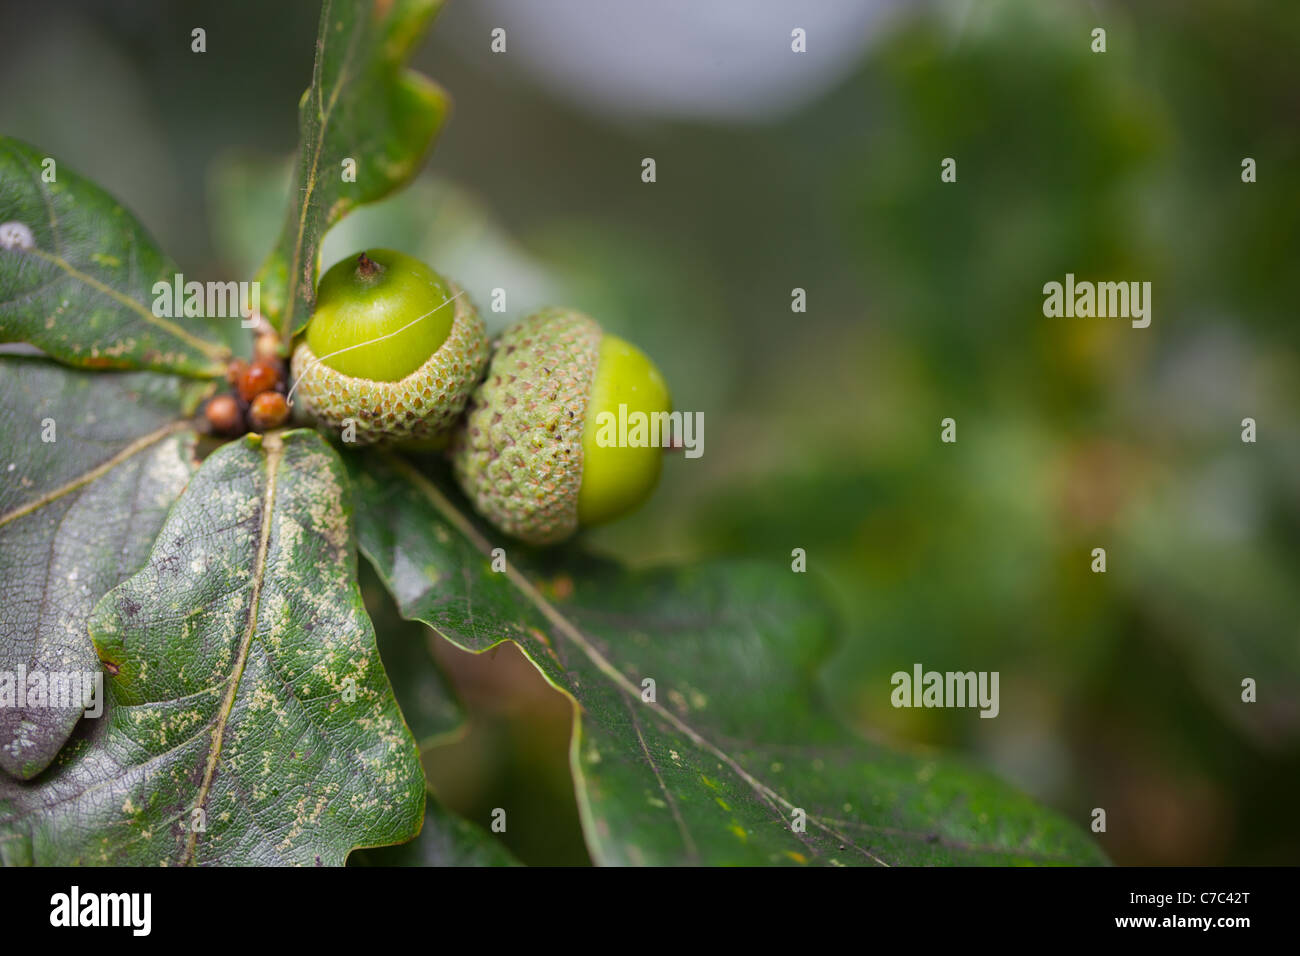 Two young acorns on an oak tree branch Stock Photo